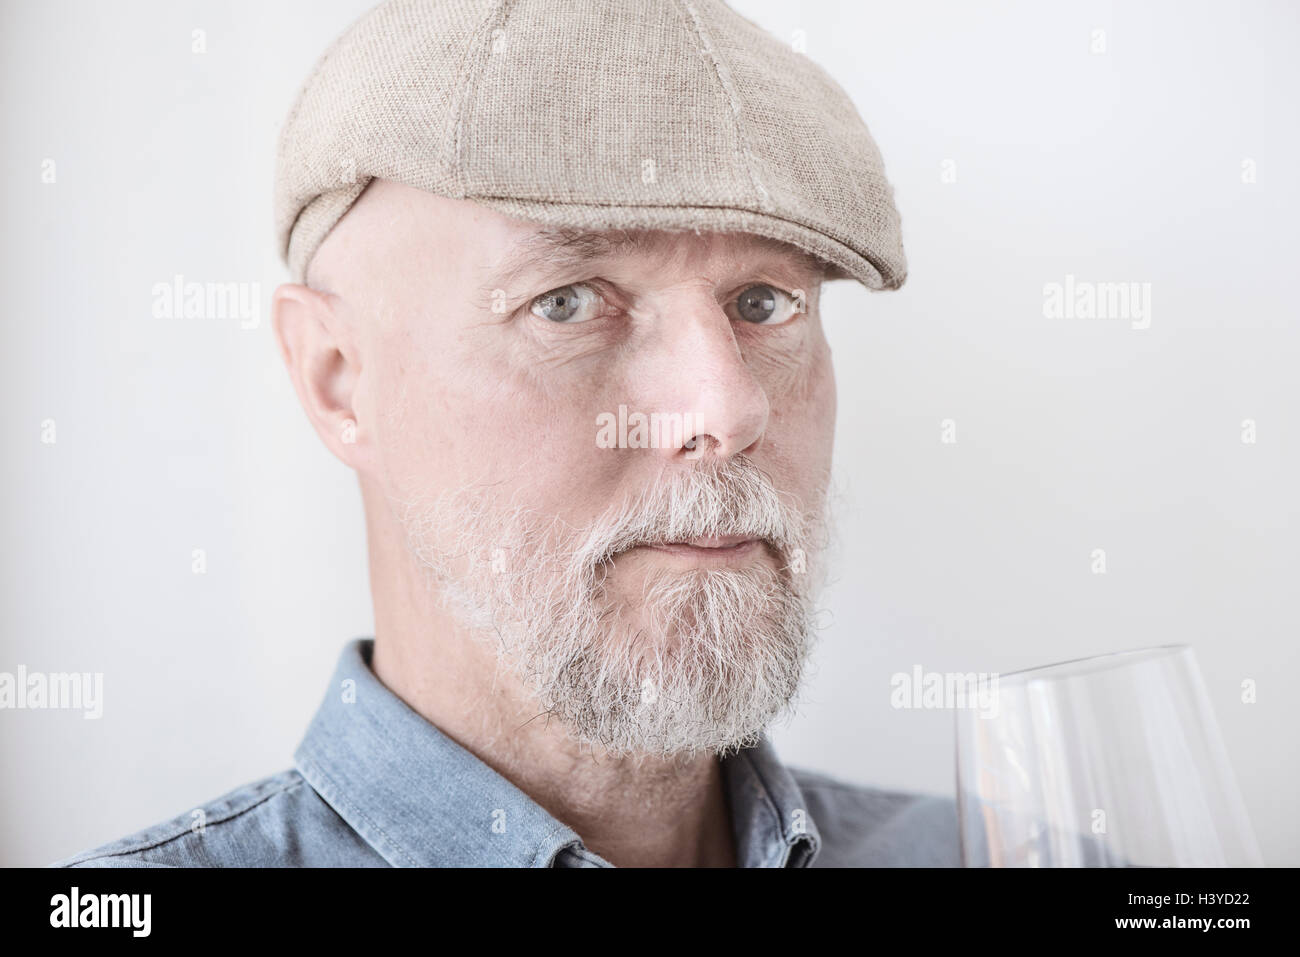 Old man in cap holding wine glass. Looking at camera with serious expression. Stock Photo